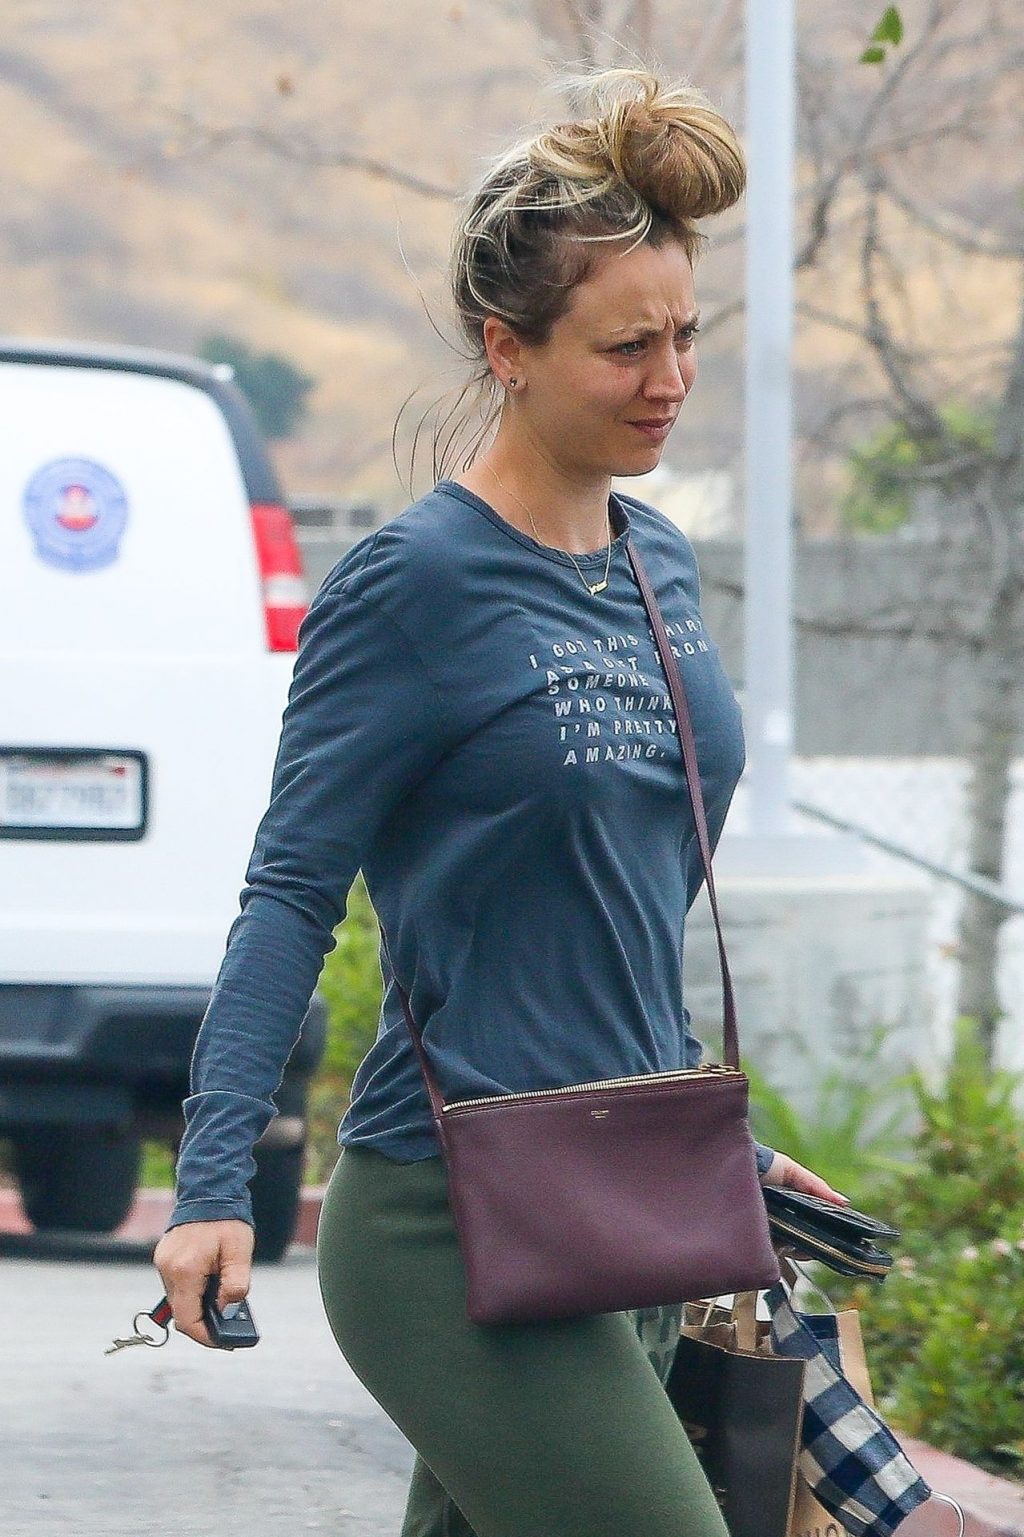 Kaley Cuoco Appears to Have a Bad Hair Day While Grocery Shopping (19 Photos)